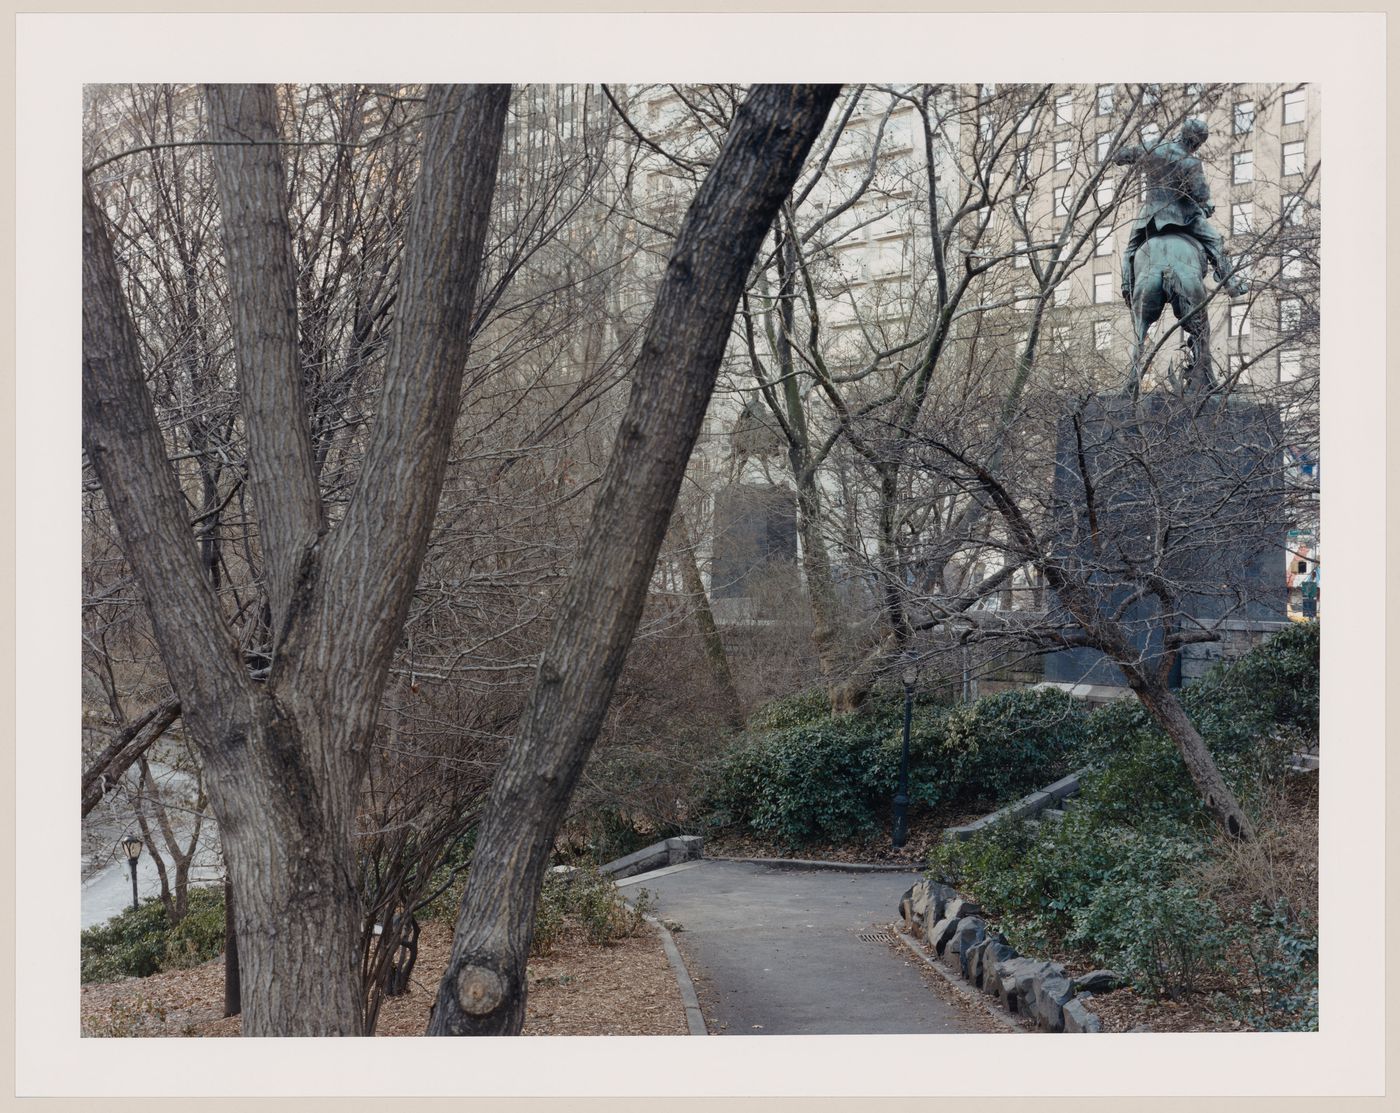 Viewing Olmsted: View of path with trees, South End, Central Park, New York City, New York